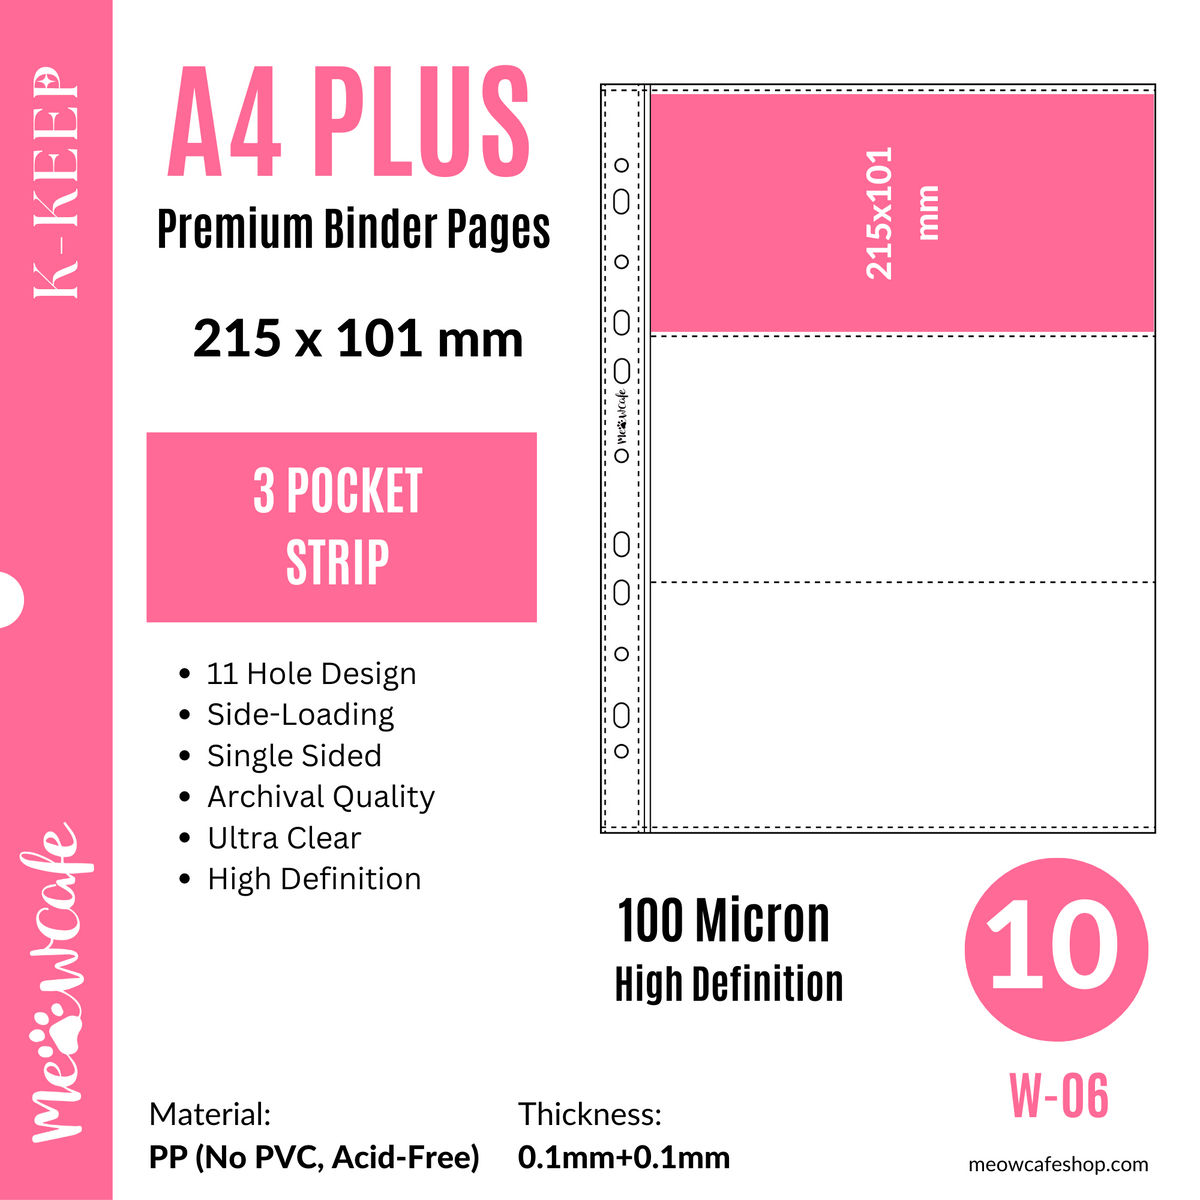 K-KEEP [A4 PLUS] -  3 Pocket (Horizontal Strip) - 11 Holes Premium Binder Pages, 100 Micron Thick, High Definition (Pack of 10) - (W-06)